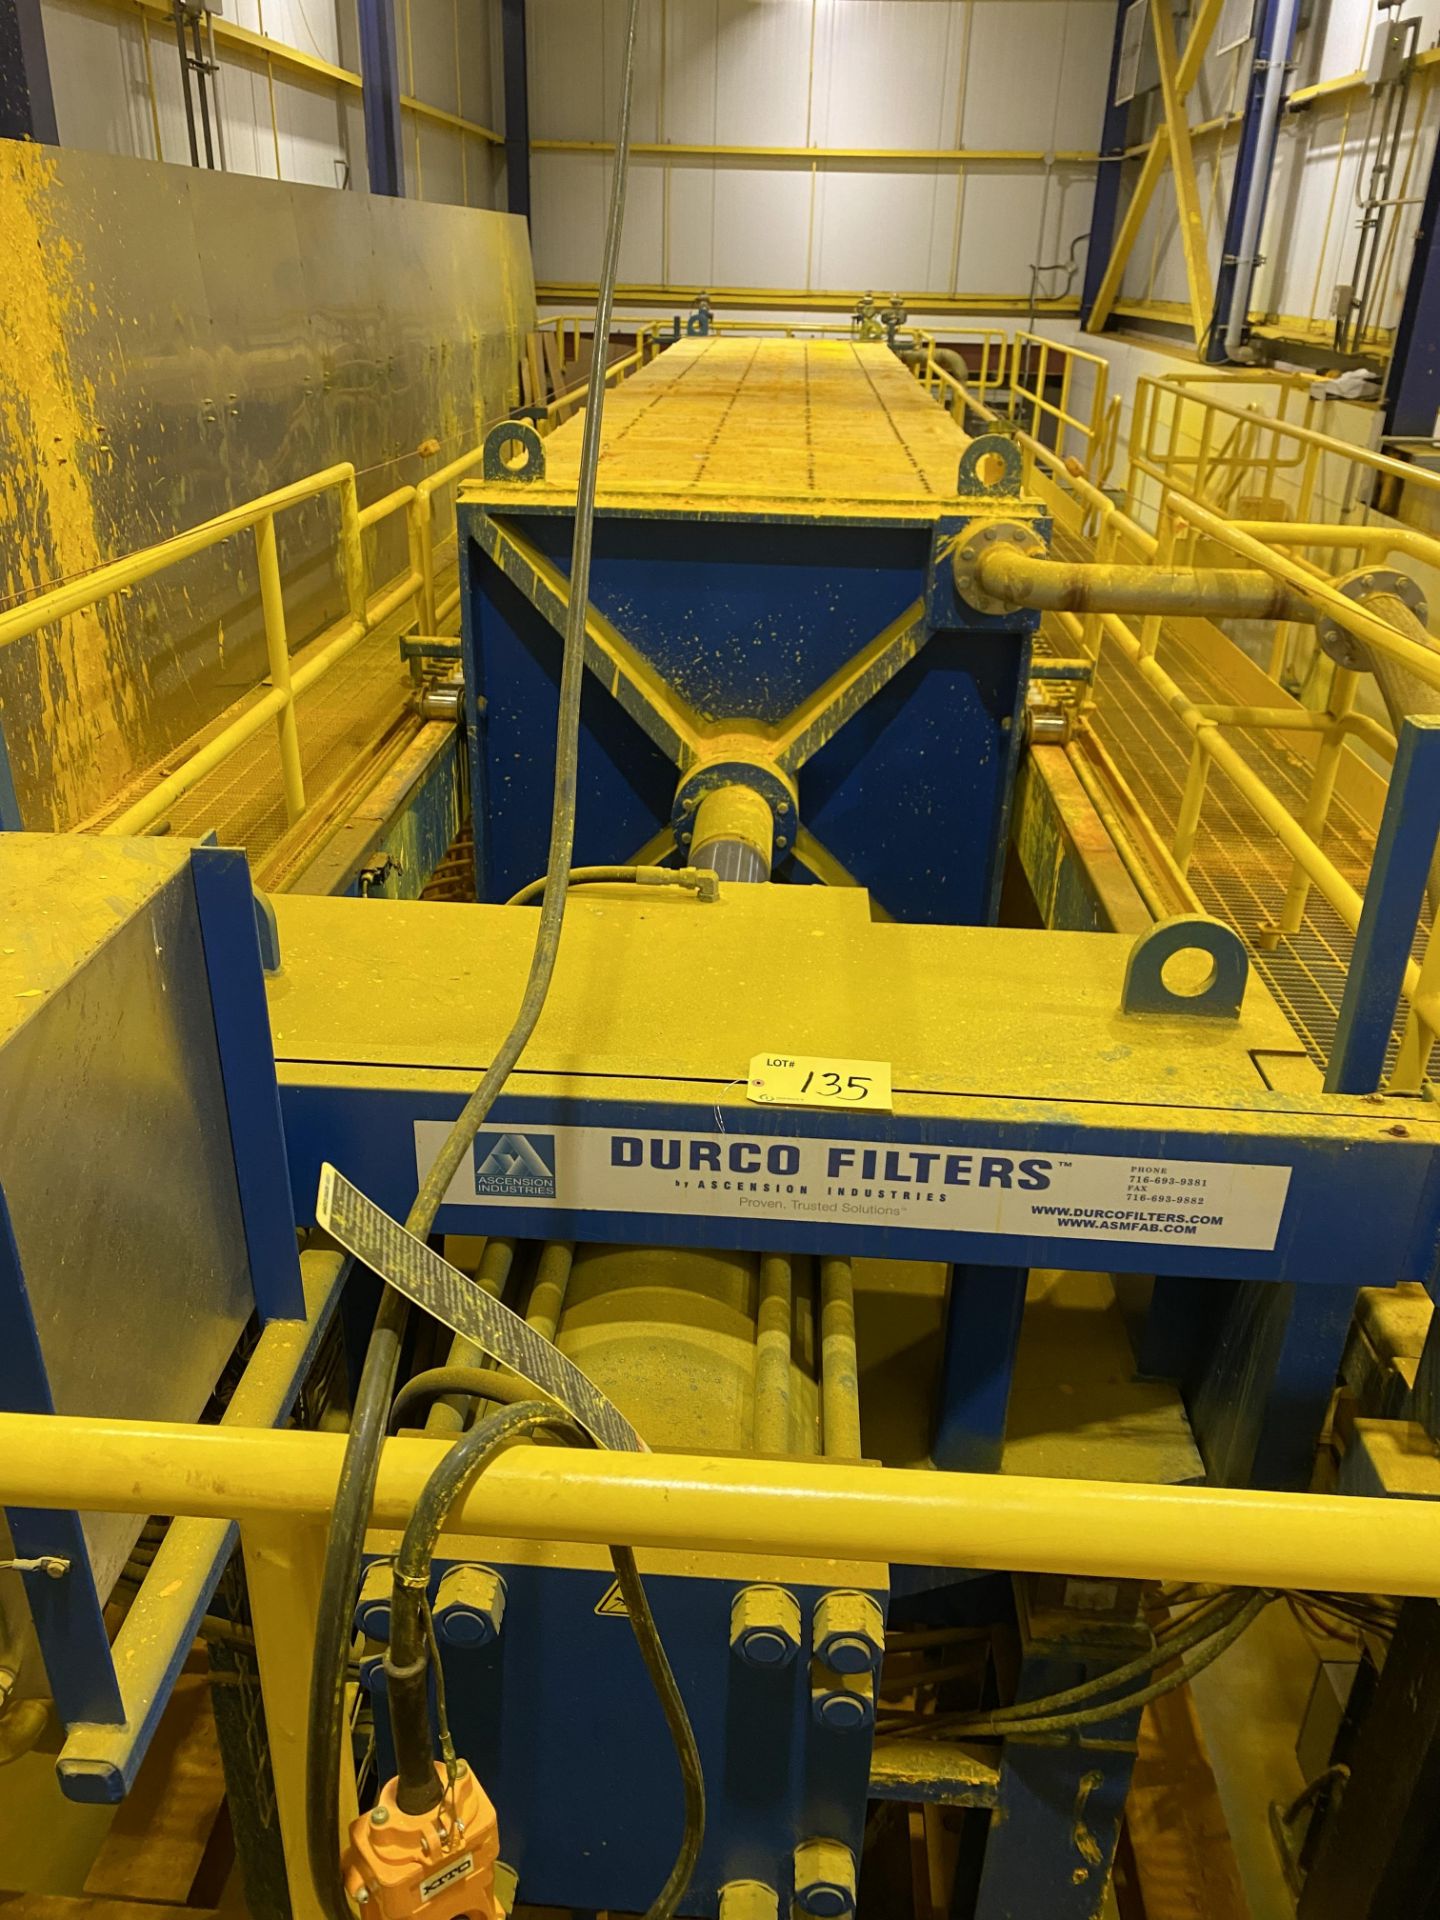 2019 DURCO FILTERS / ASCENSION EPMM1500/40-98 MEMBRANE FILTER PRESS WITH KLINKAU MEMBRANES, PLC - Image 26 of 36